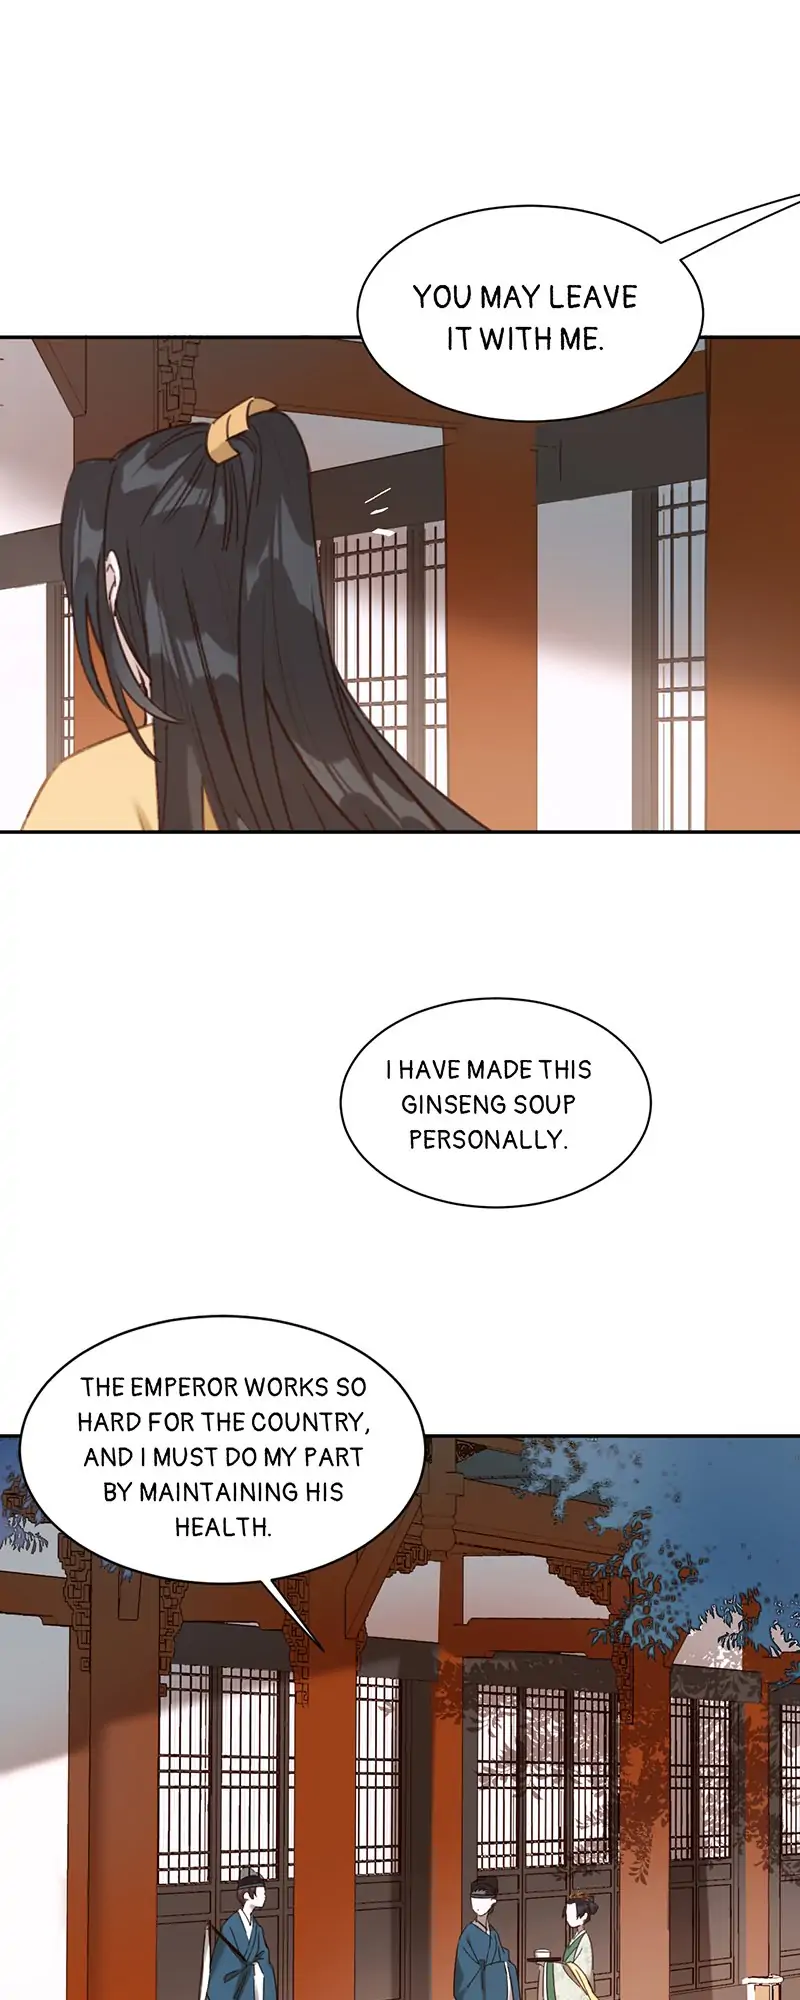 The Empress with No Virtue chapter 3